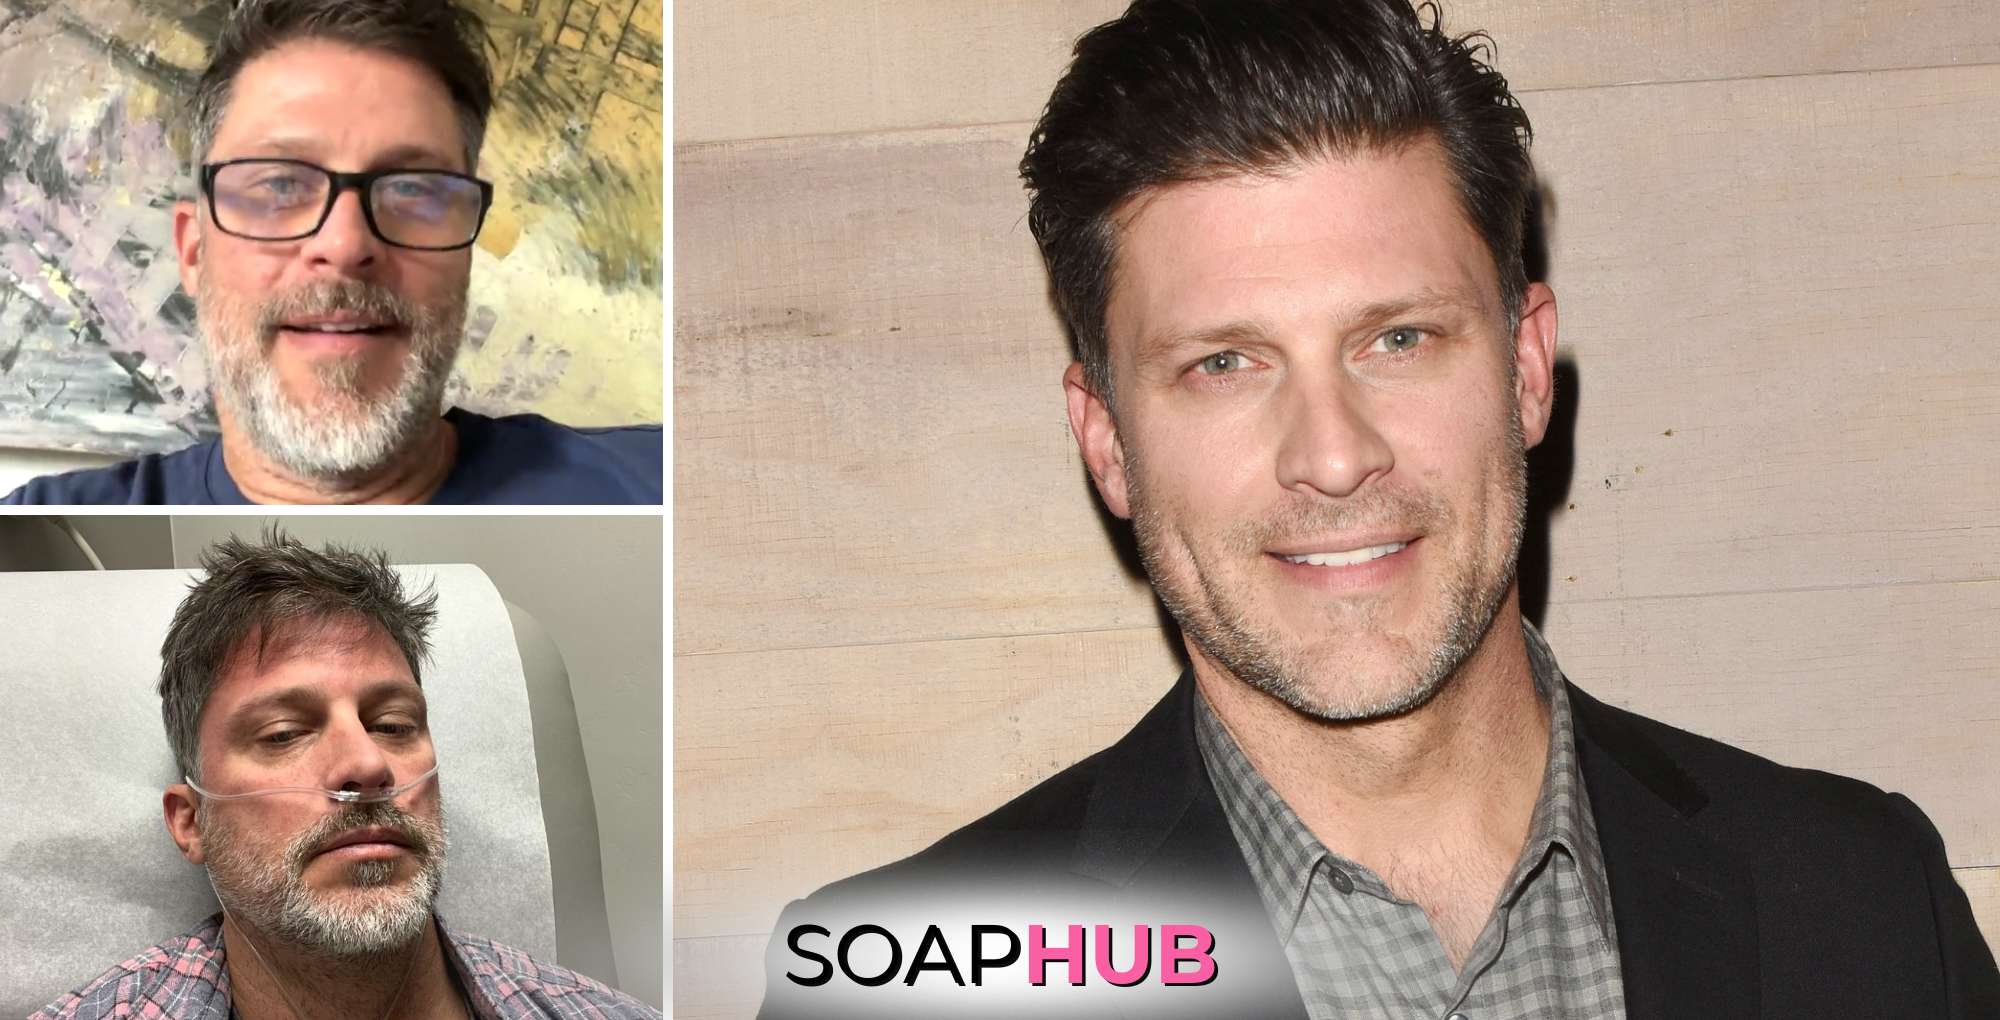 DAYS’s Greg Vaughan Gives An Important PSA After Health Crisis